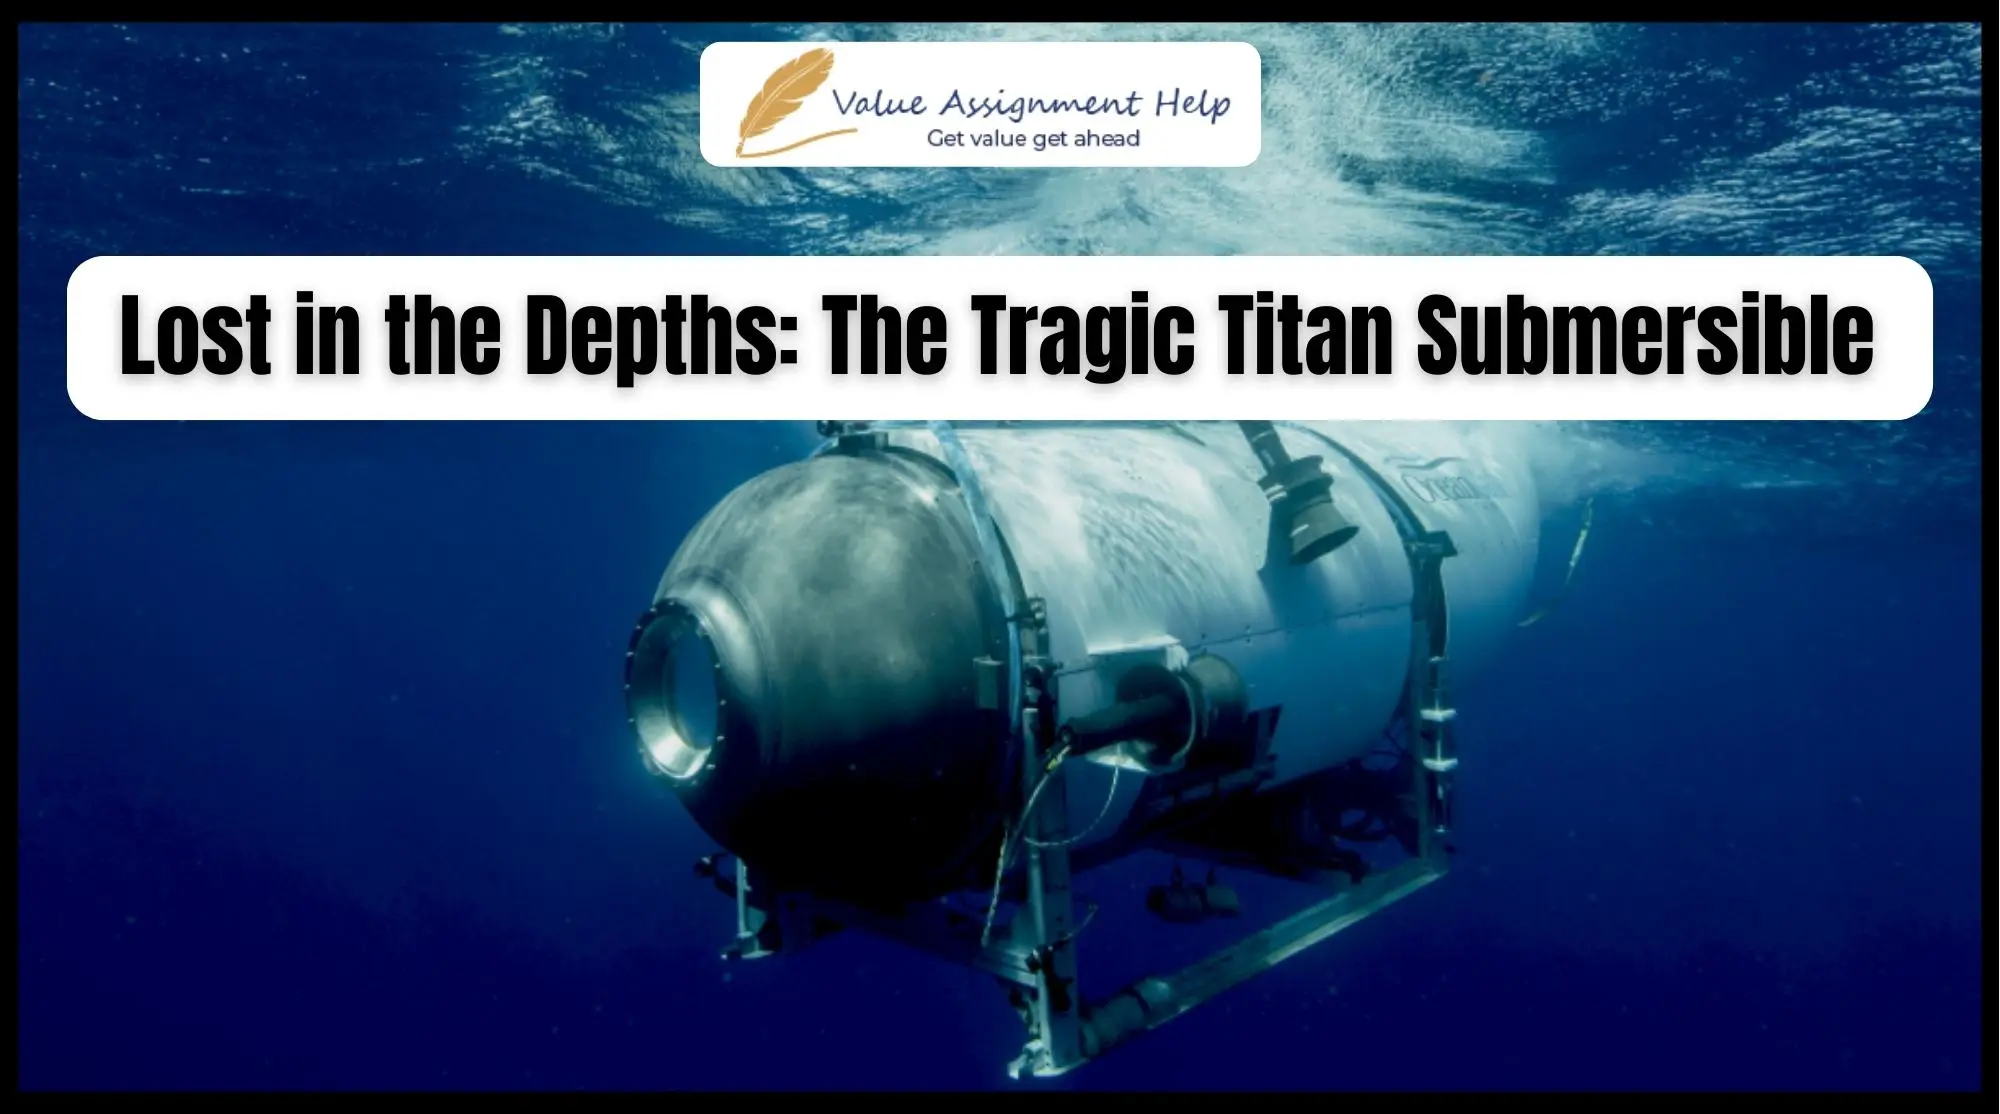 lost in the depths: the tragic titan submersible